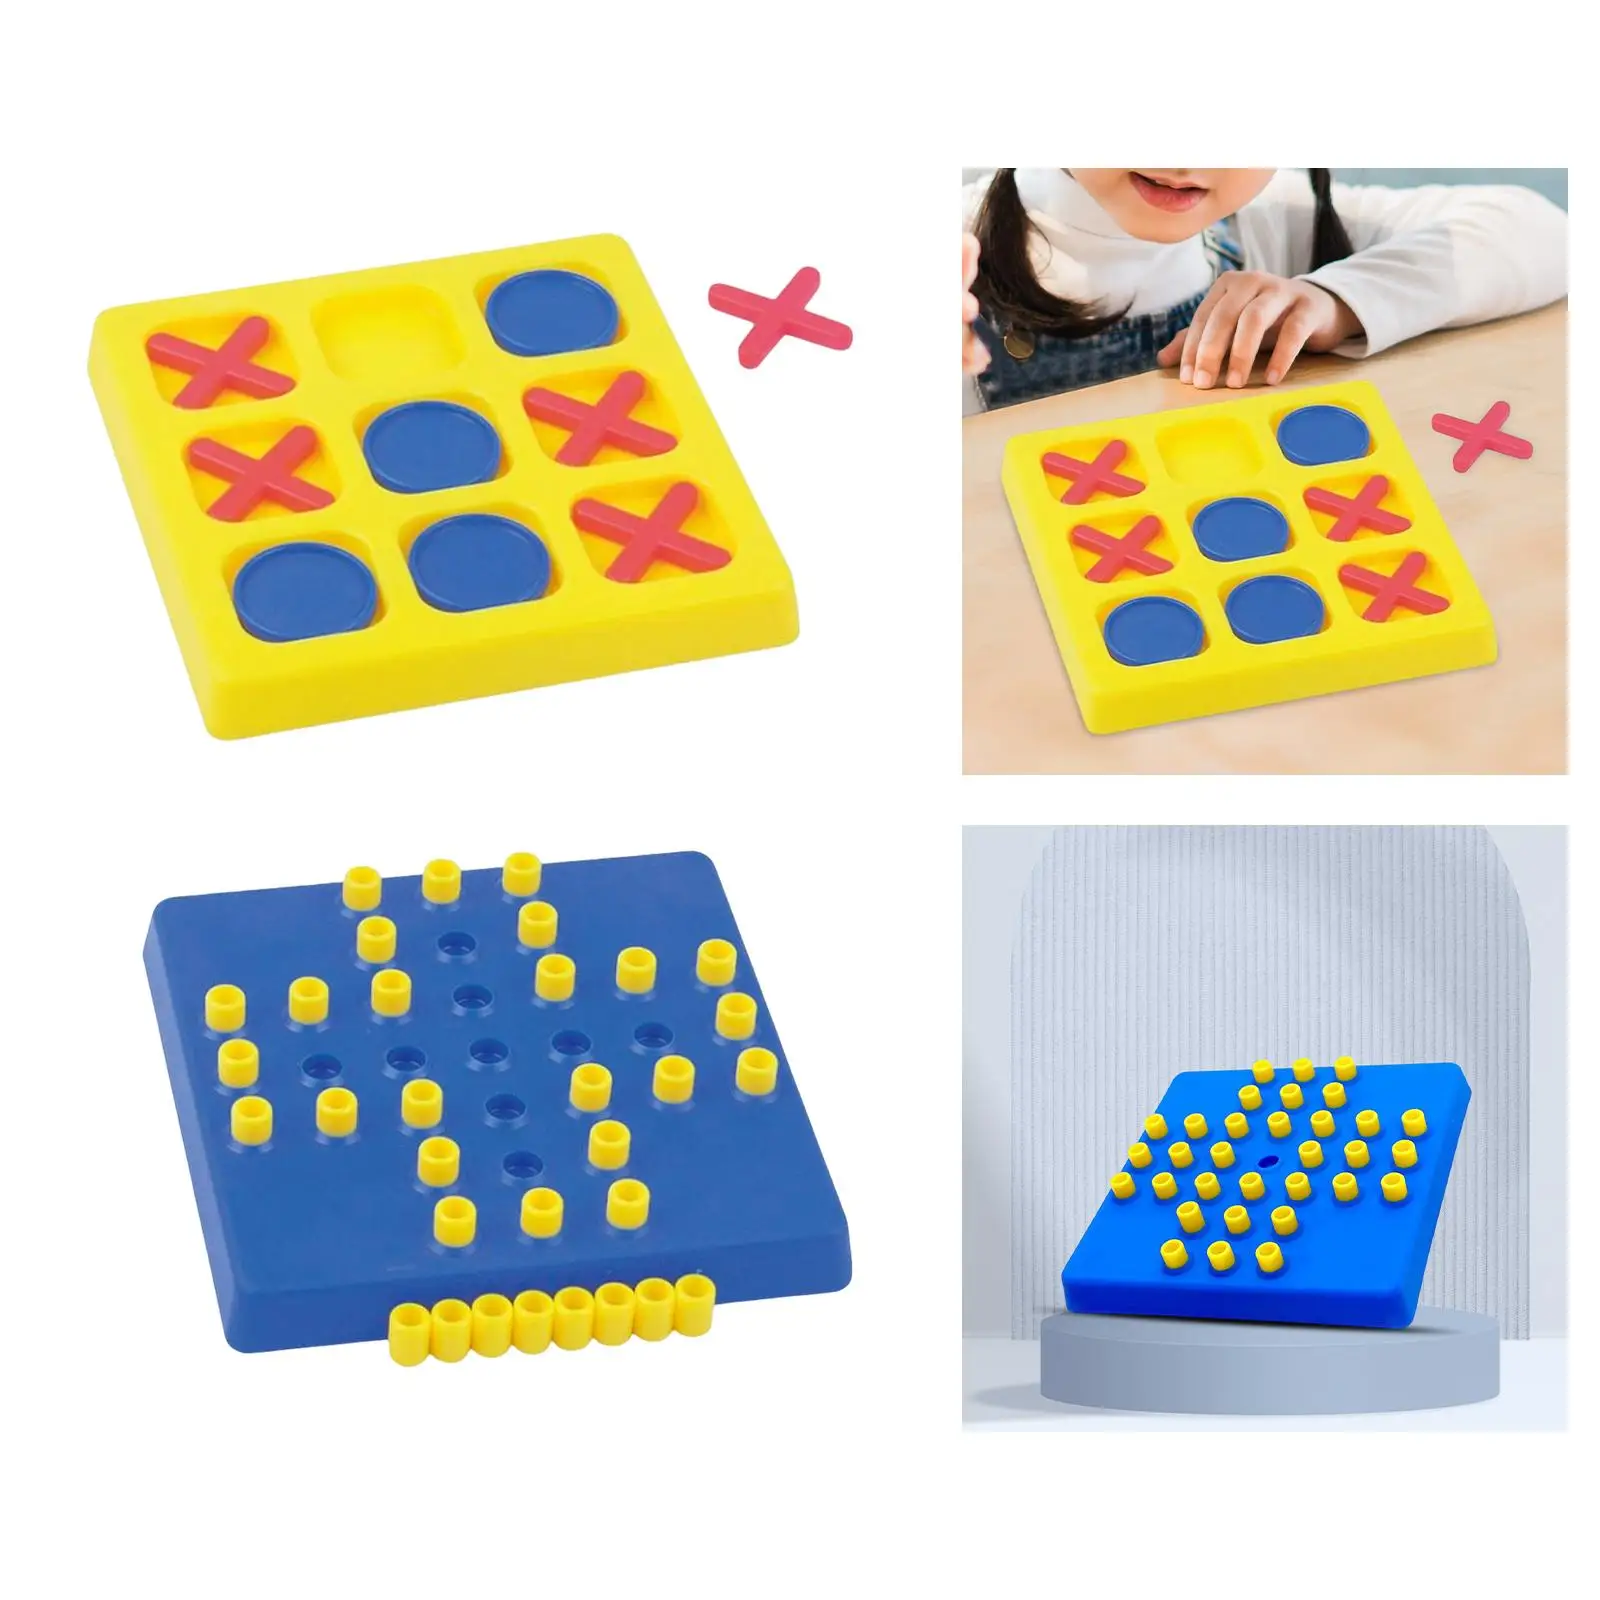 Classic Marble Solitaire Board Game Developing Puzzle Toy Tic TAC Toe for Outdoor